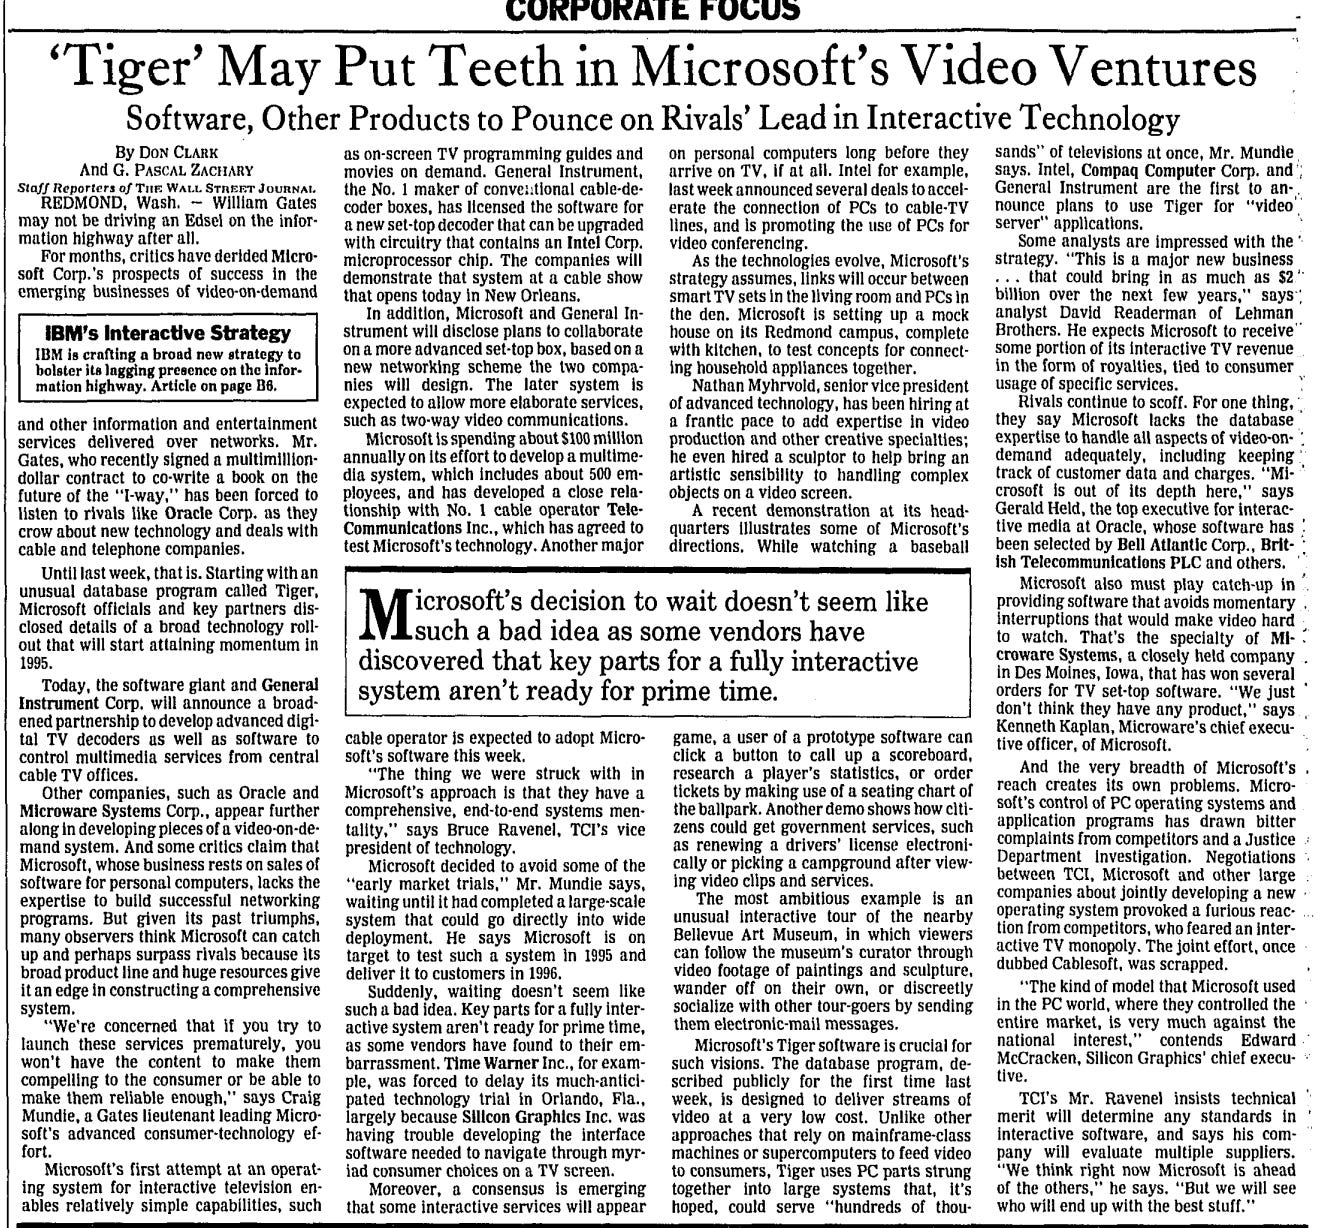 WSJ article: 'Tiger' May Put Teeth in Microsoft's Video Ventures: Software, other products to pounce on Rival's Lead in Interactive Technology